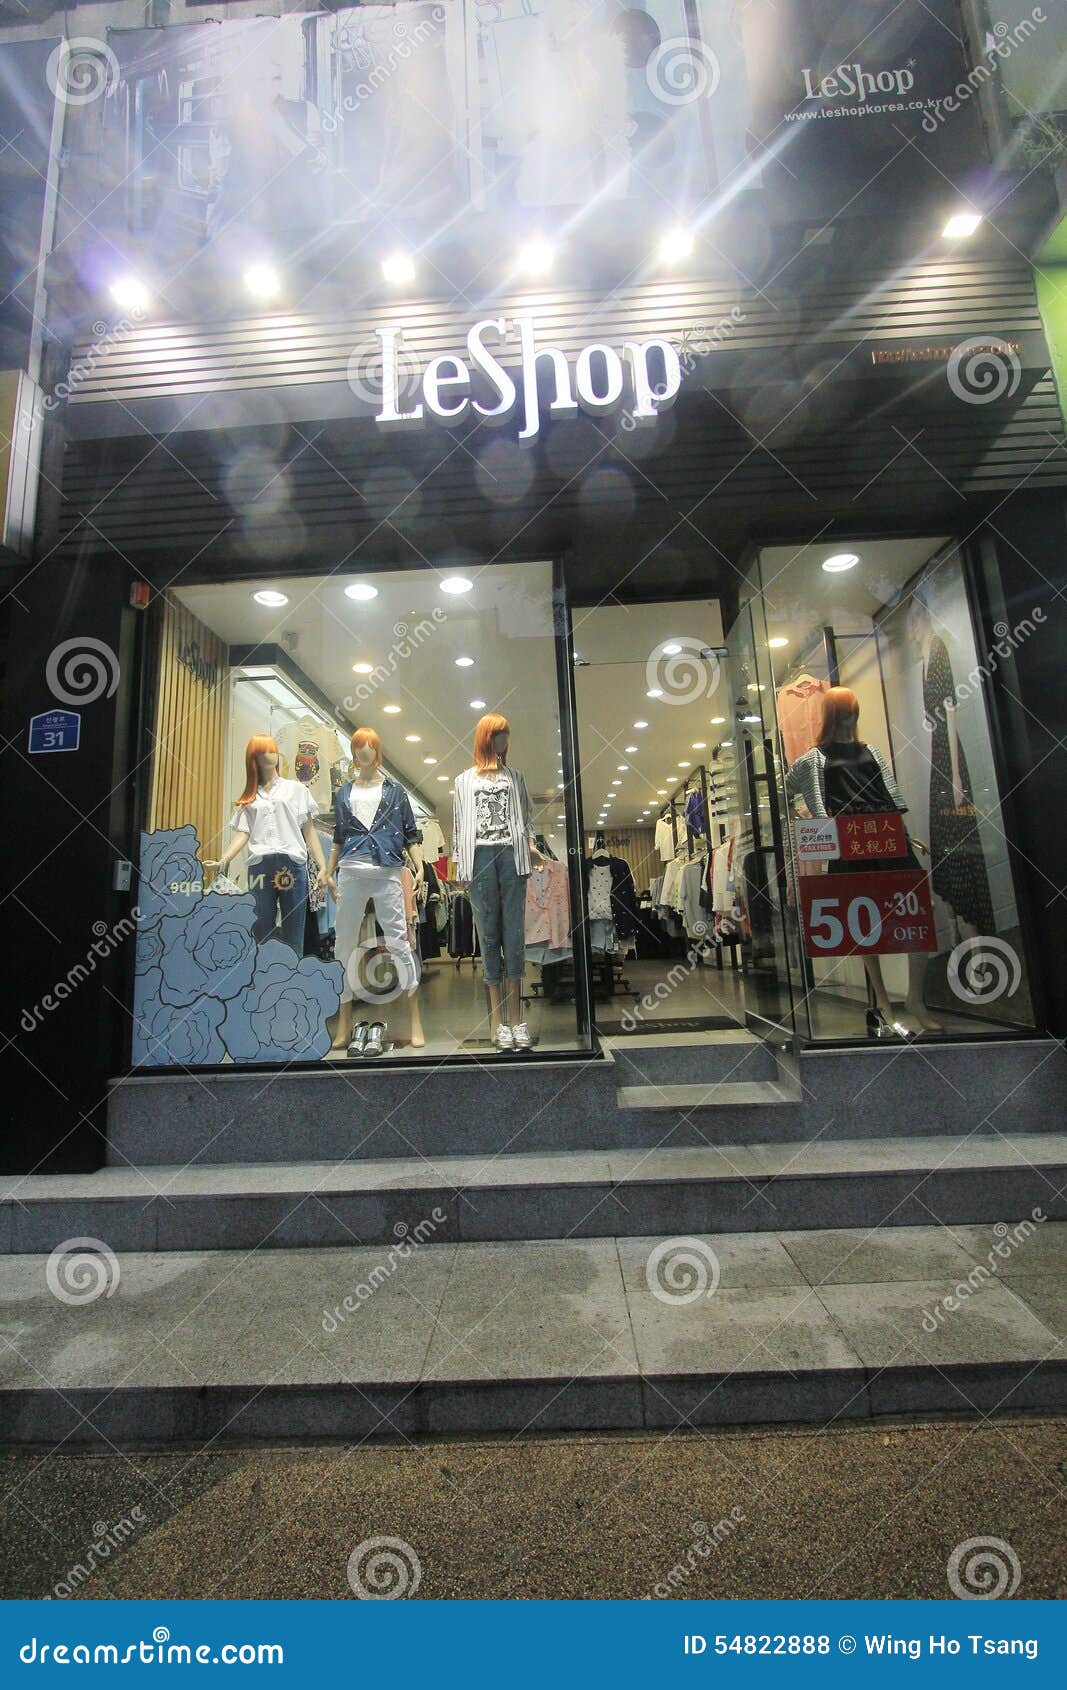 Leshop shop in South Korea editorial stock photo. Image of health ...